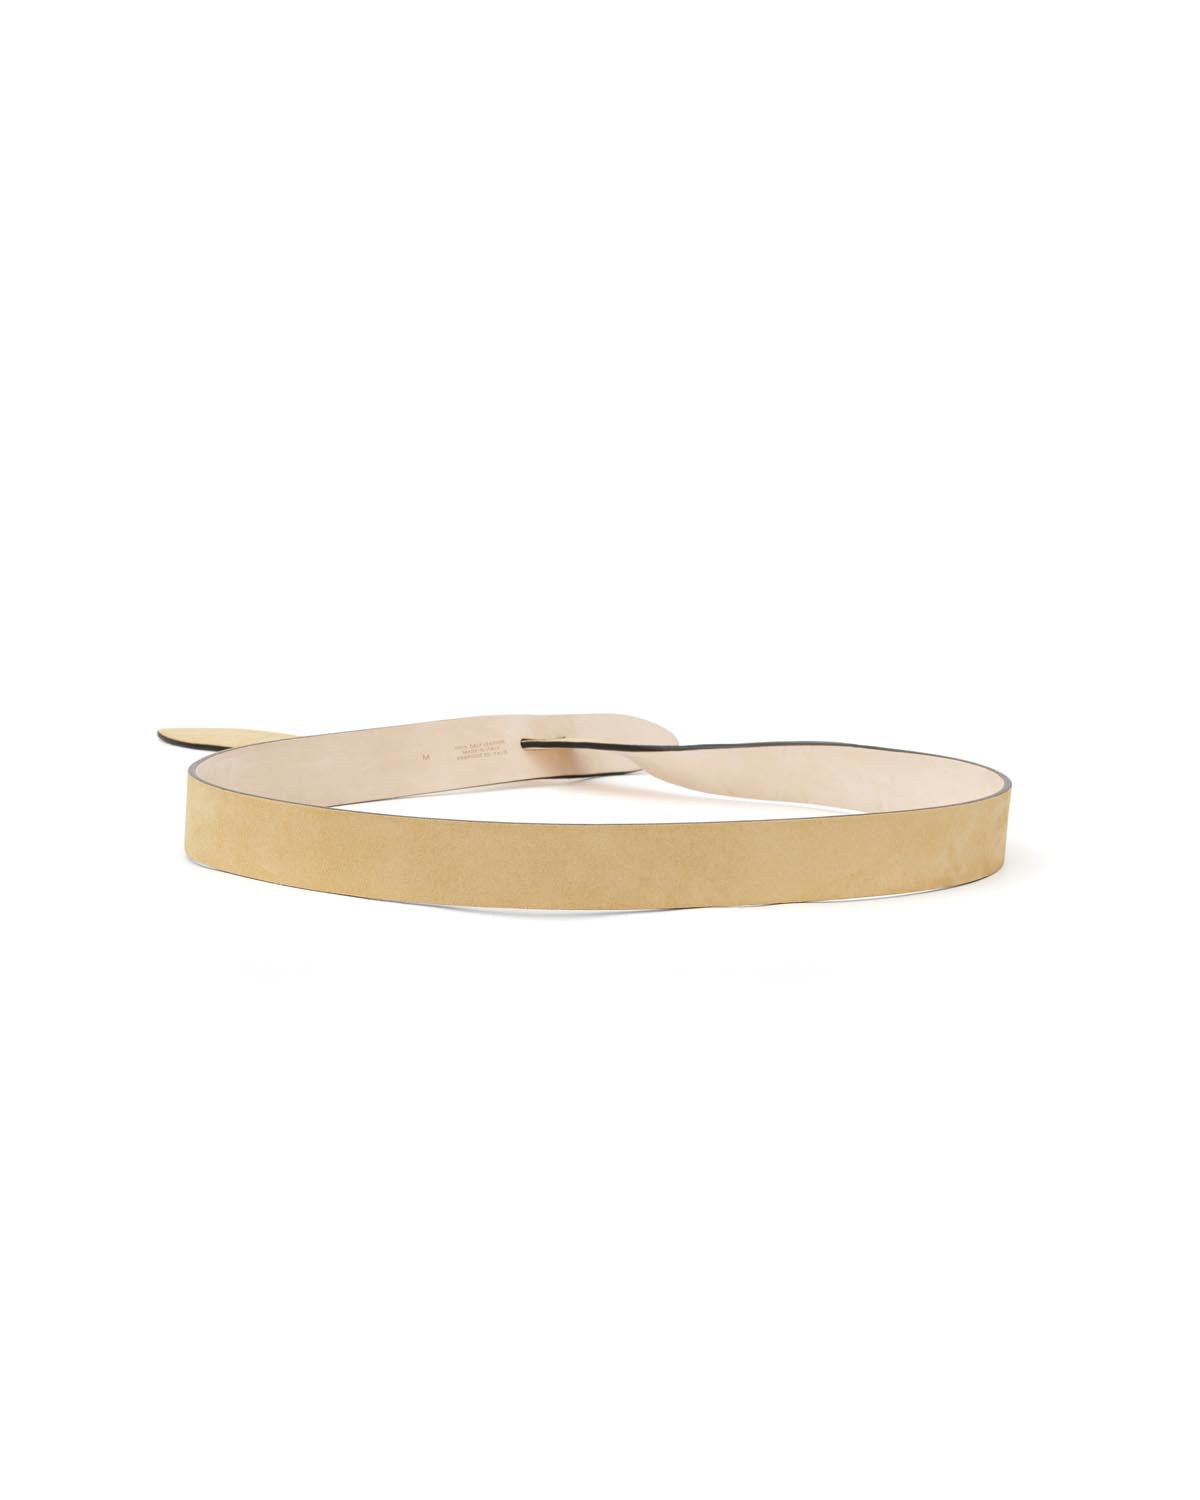 Ceinture lecce Woman Toffee 2